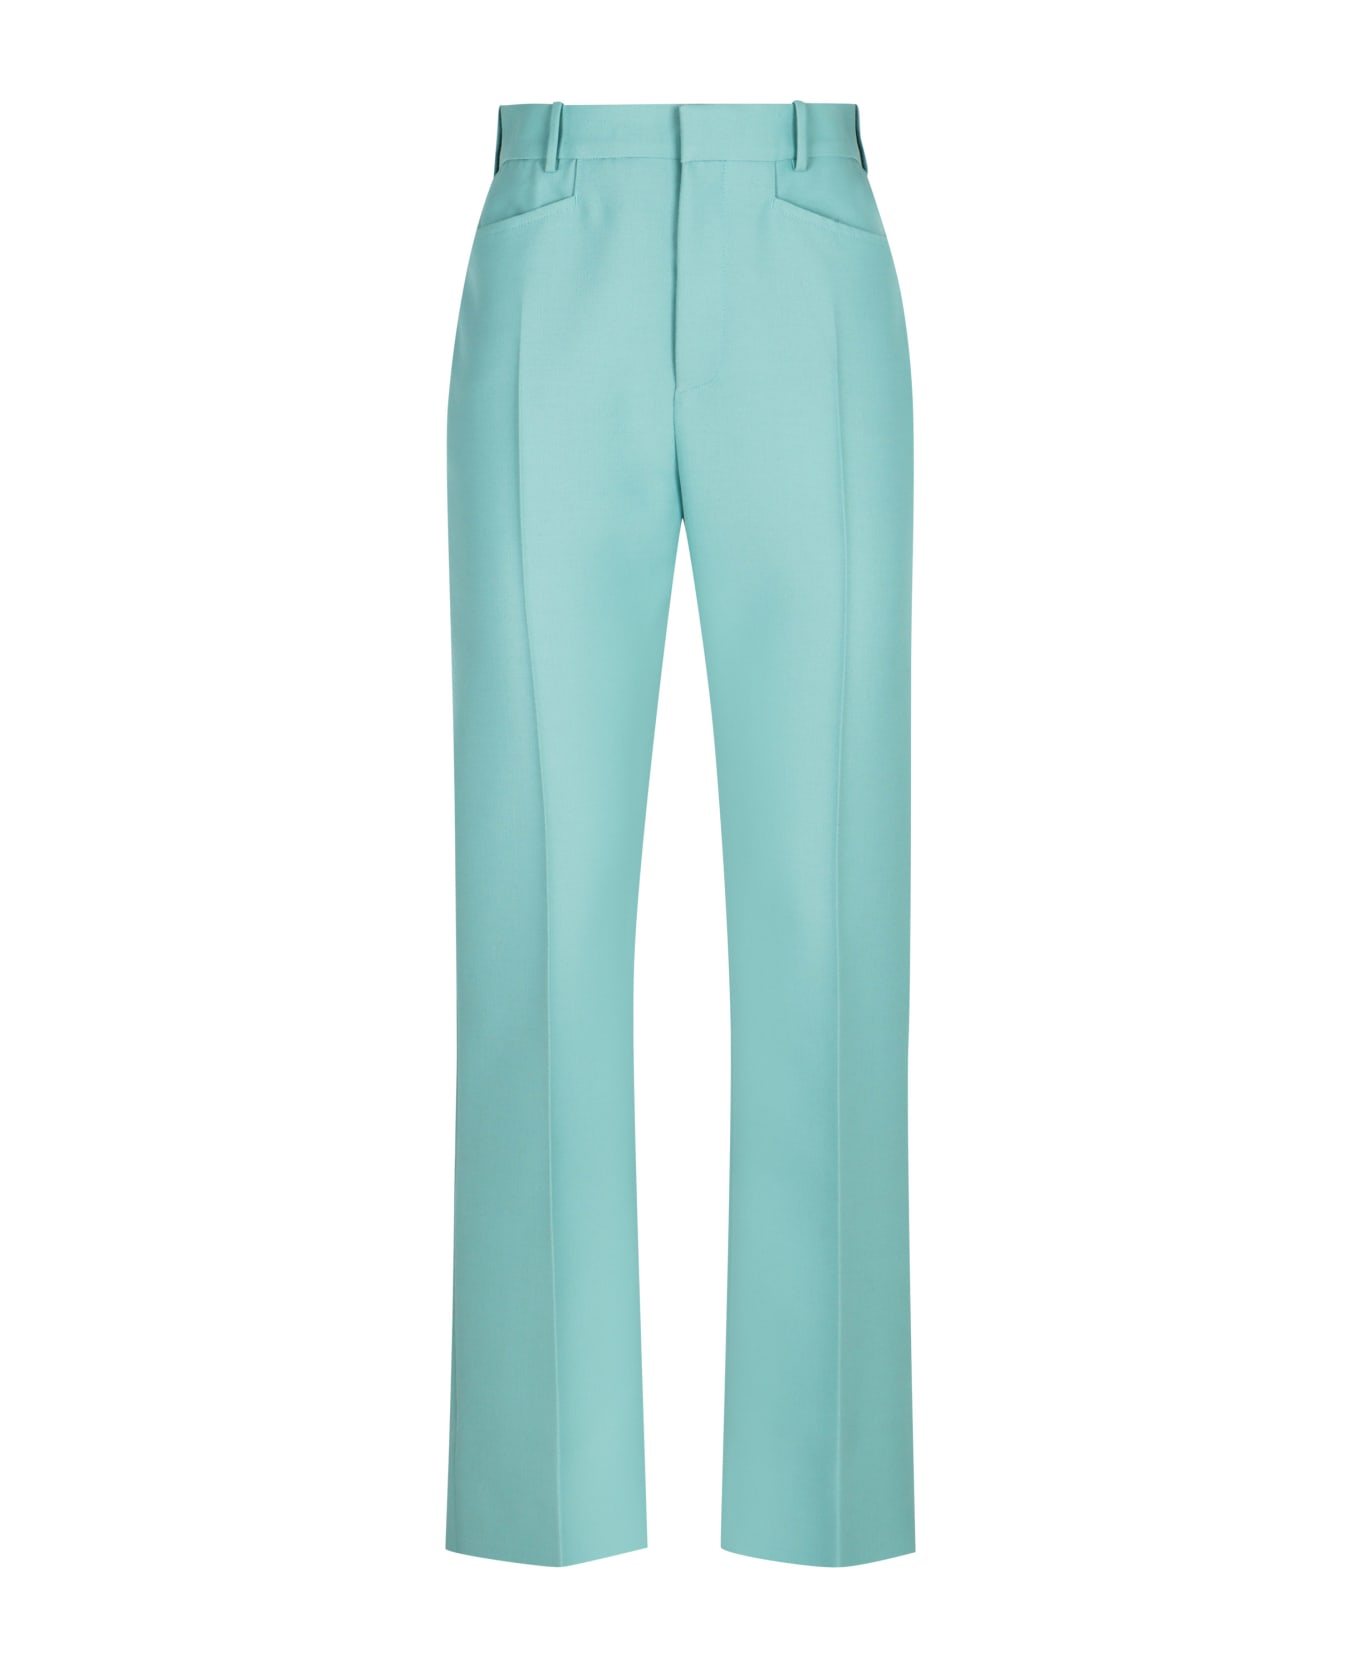 Tom Ford Wool Blend Trousers - Light Blue ボトムス